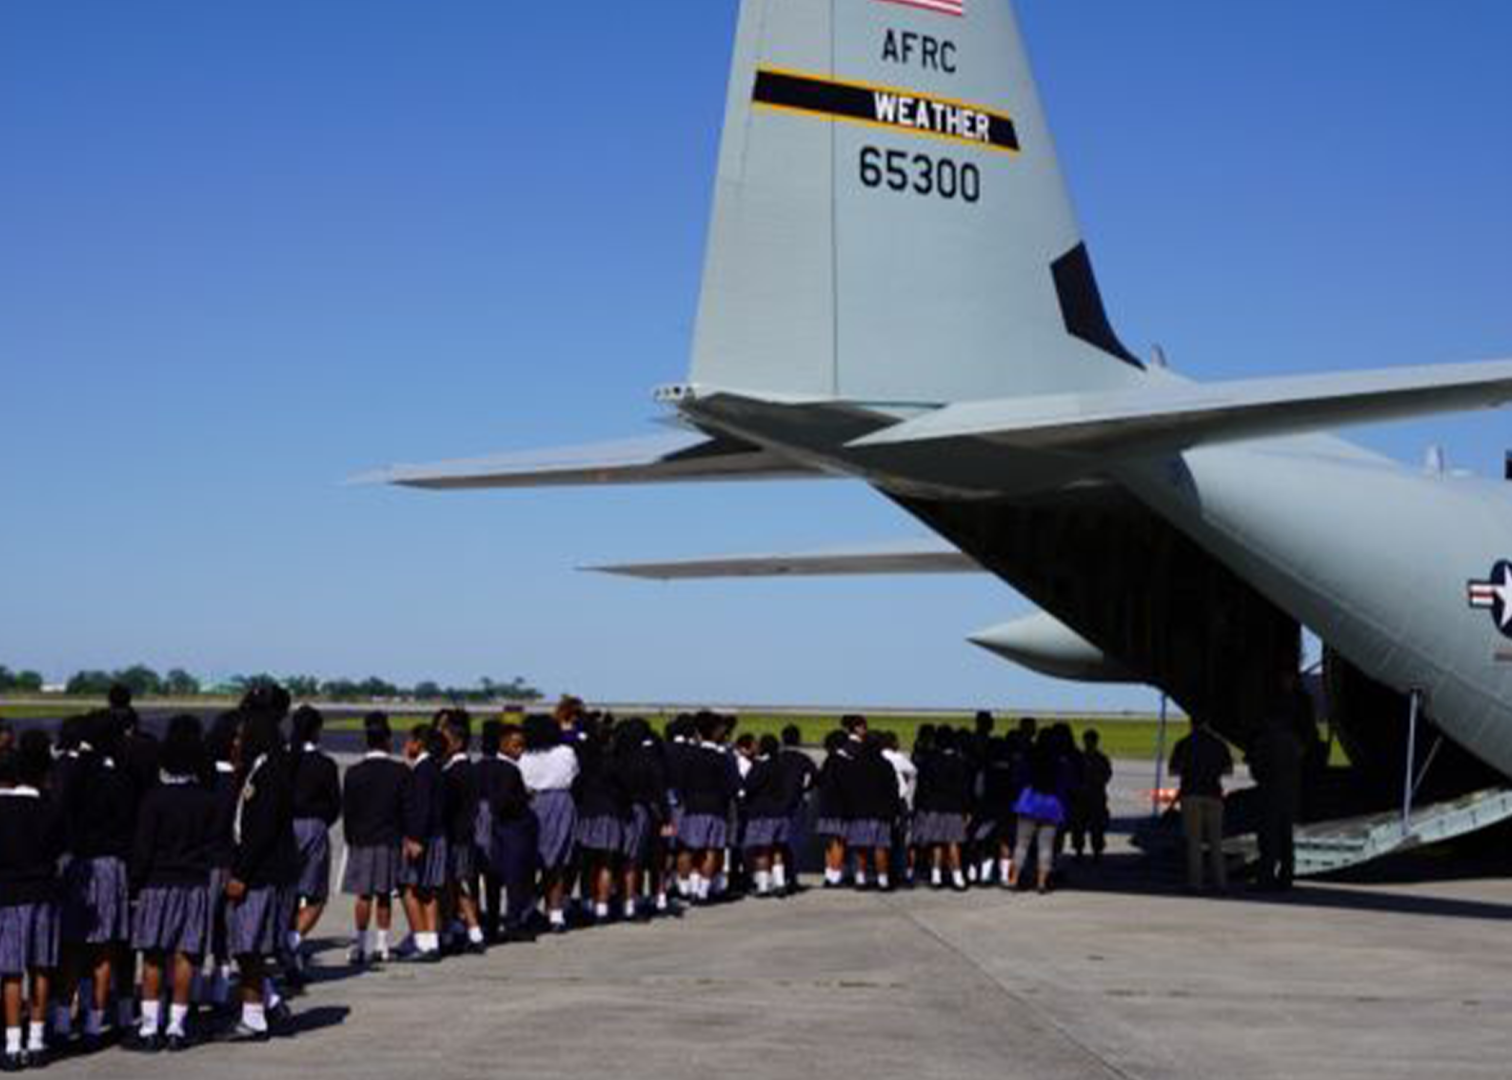  Fourth and fifth grade students from St. Mary's Academy in New Orleans line up to tour the Airforce Reserves Command Weather Airplane at Lakefront. 